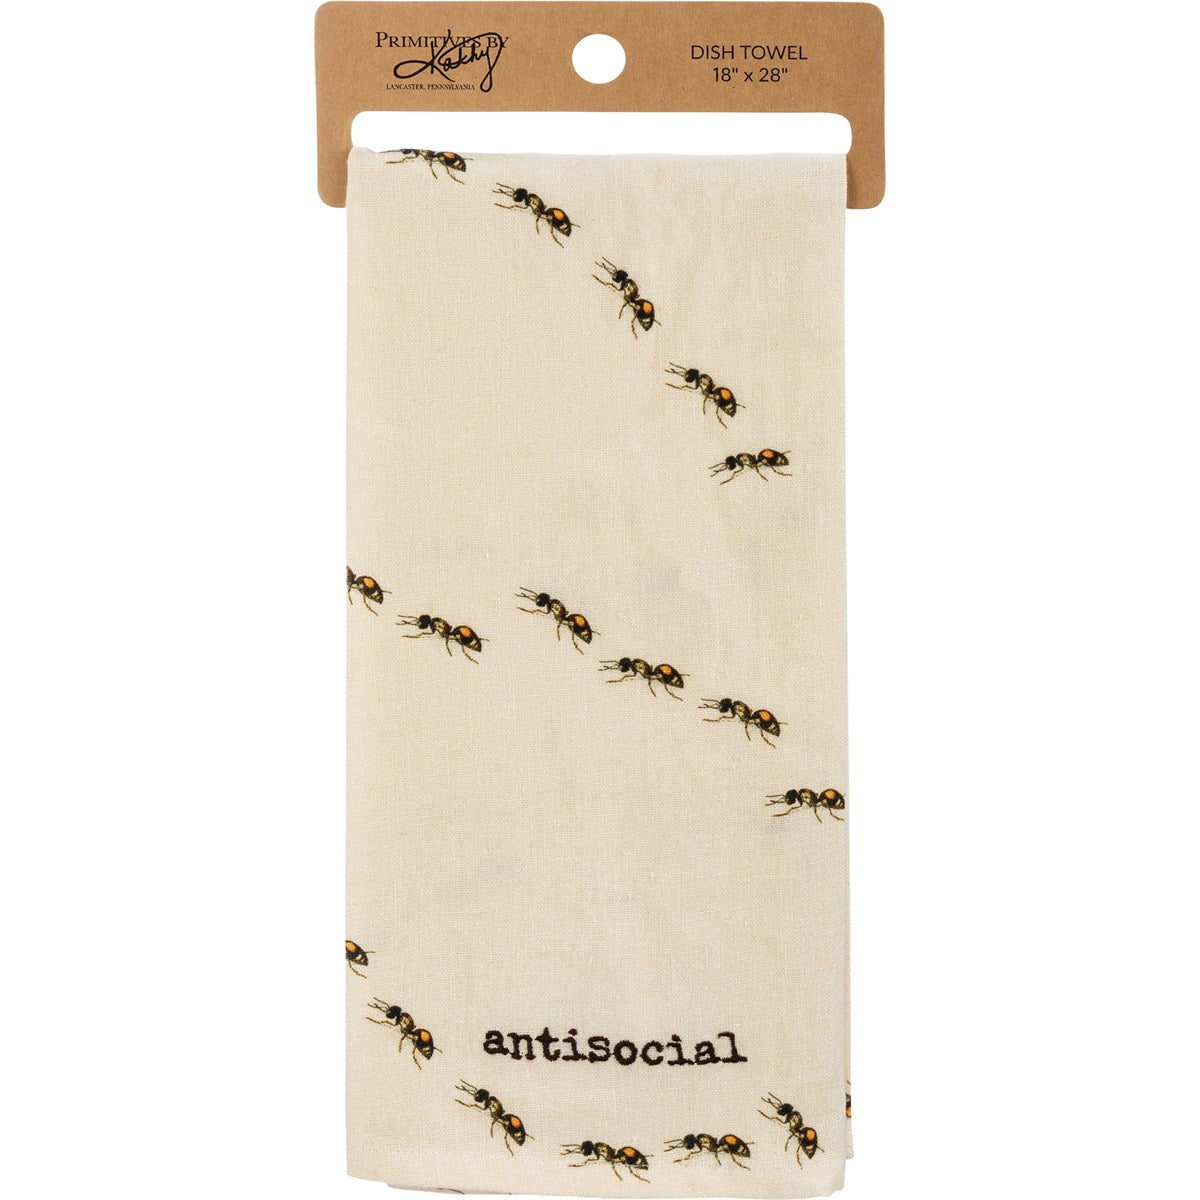 off-white dishtowel with ant graphics and "antisocial" on it.